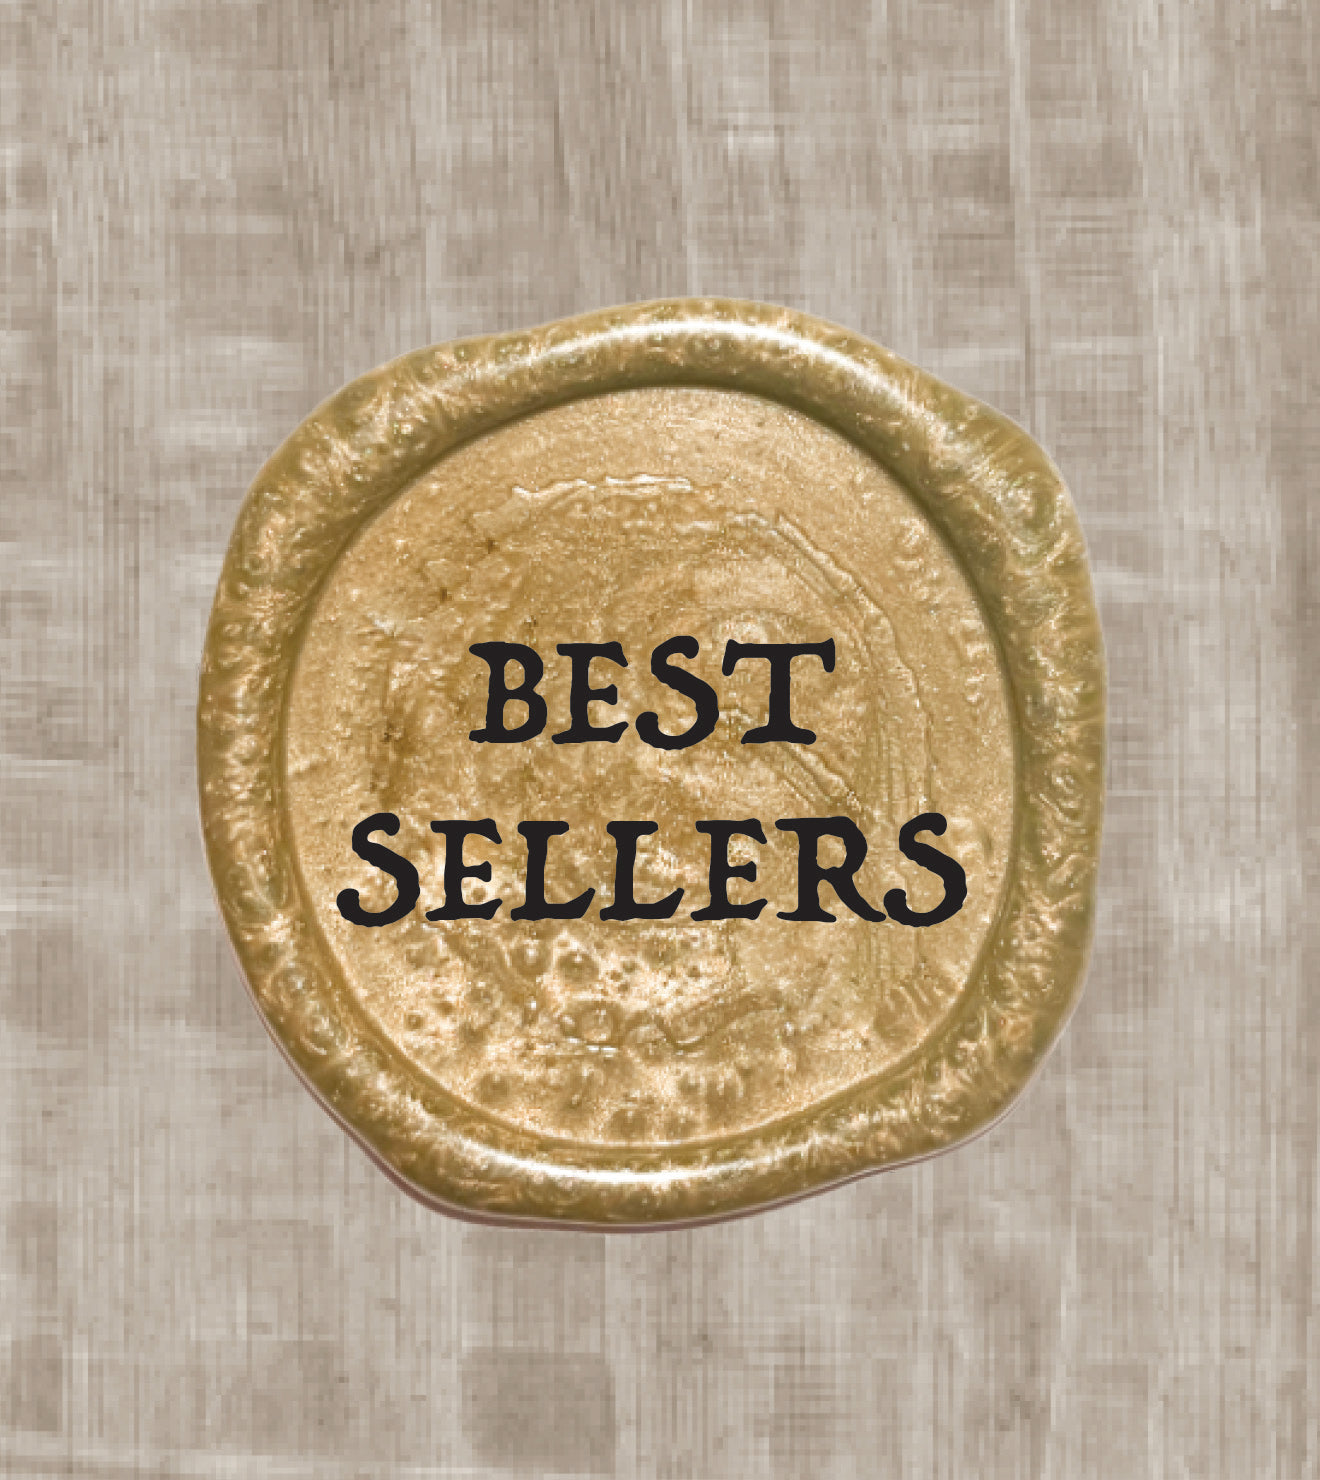 Best sellers from Sacred Scribe Publishing